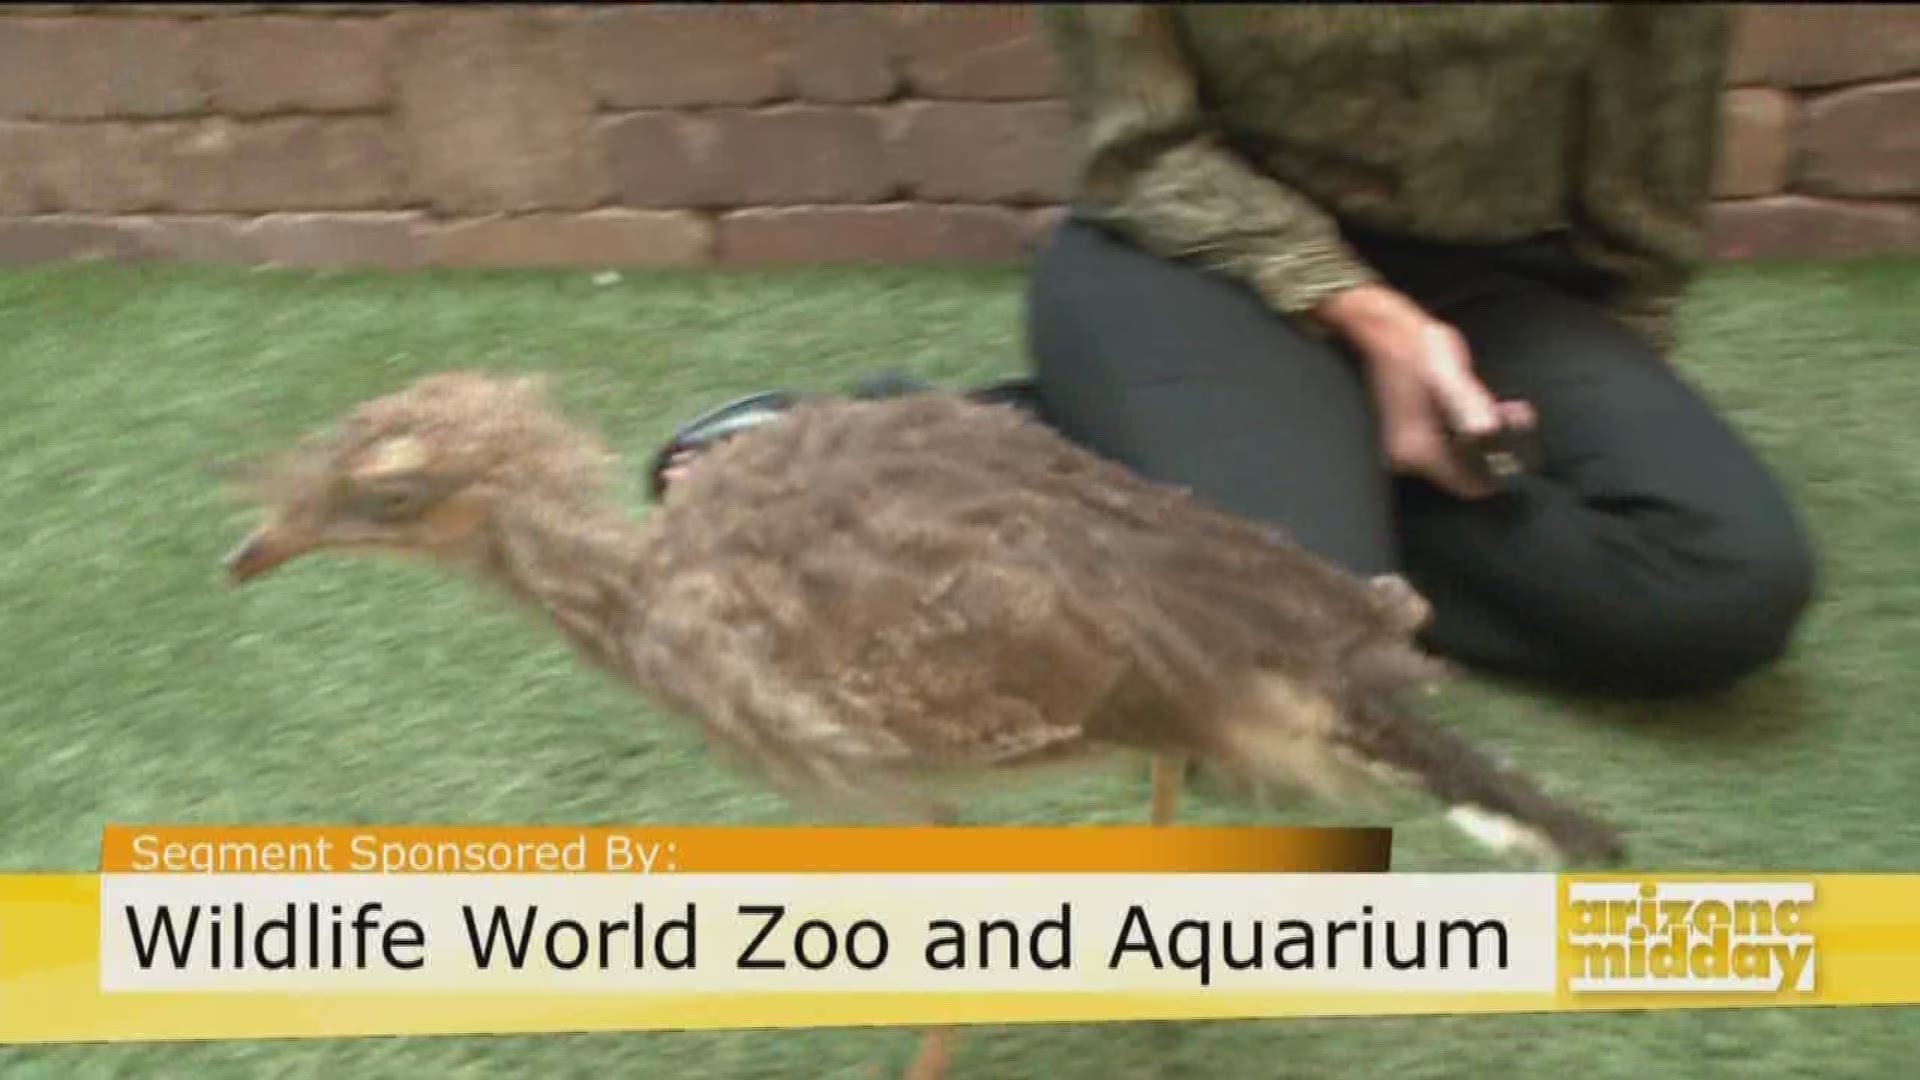 Lauren Finnerty with Wildlife World Zoo brings Elliot, the Crested Seriema and how to meet other amazing creatures like him this summer at the zoo!